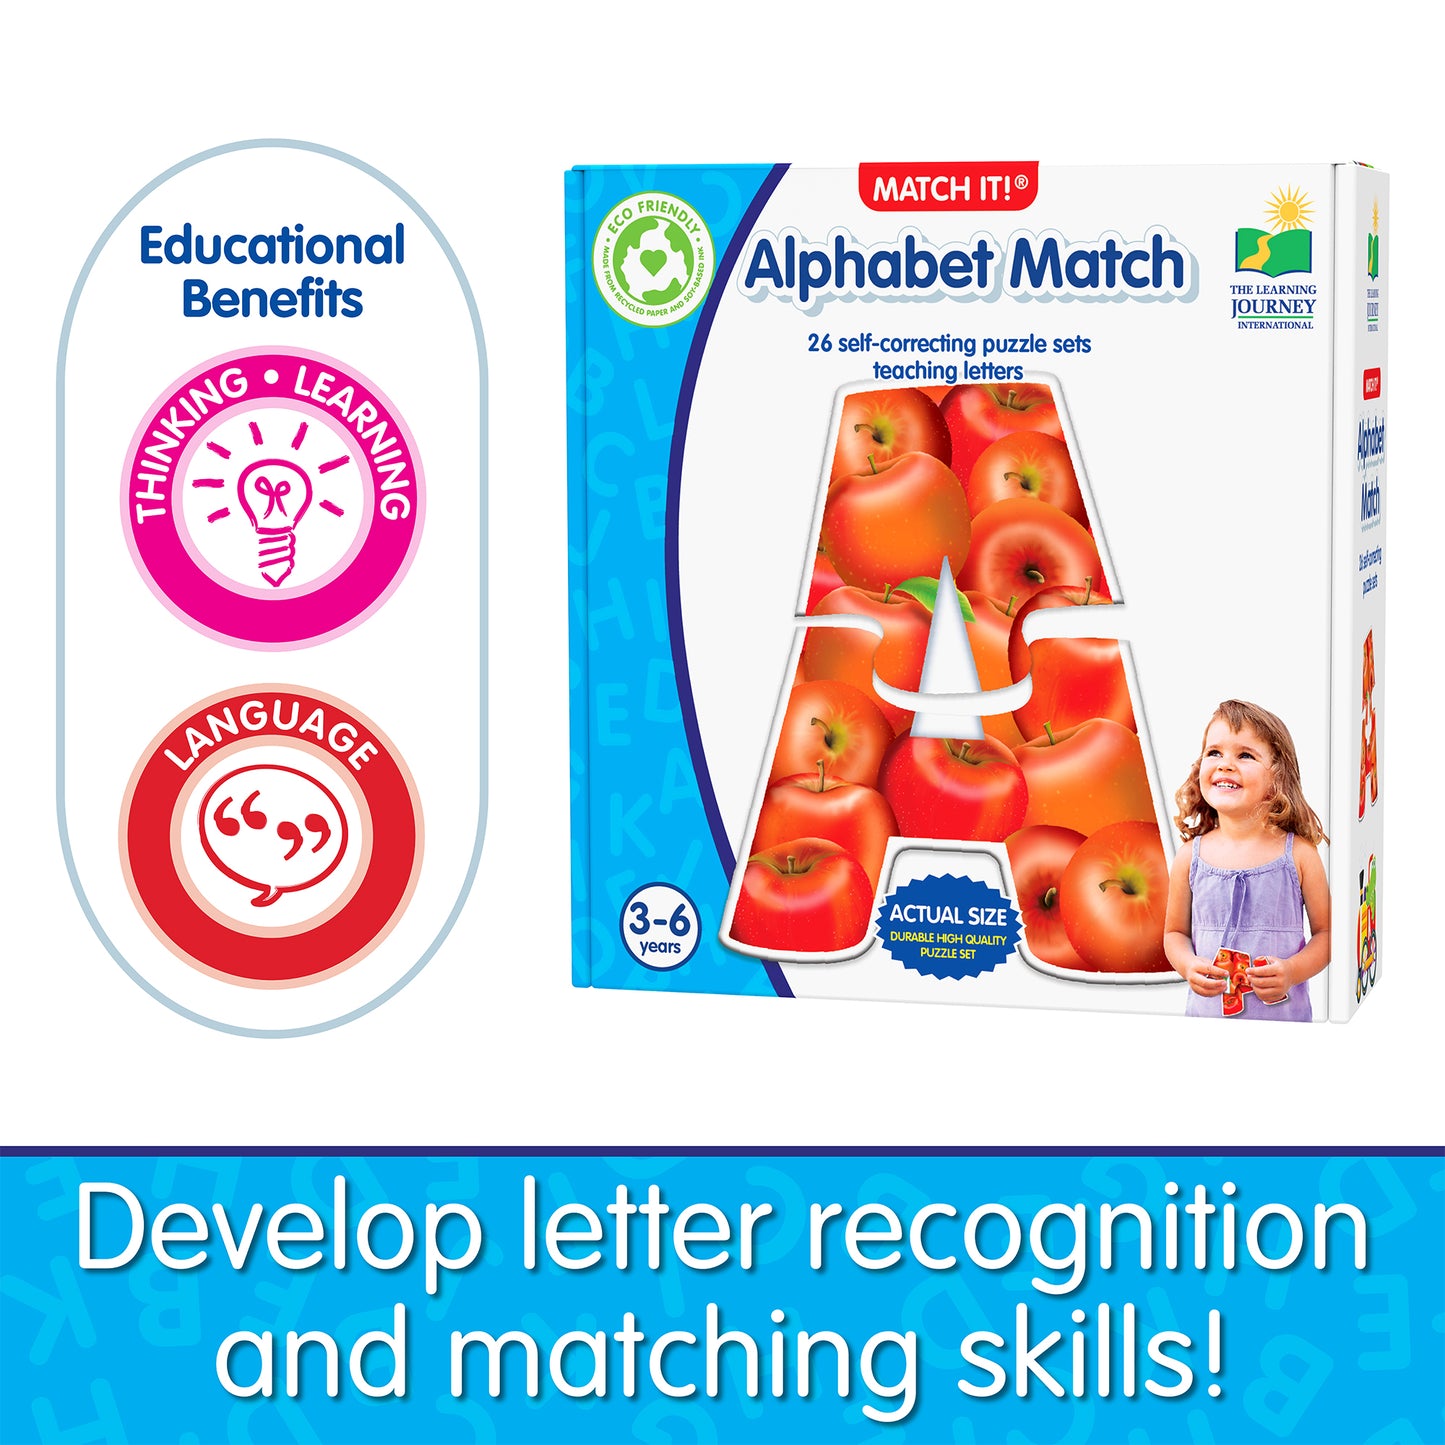 Infographic about Alphabet Match's educational benefits